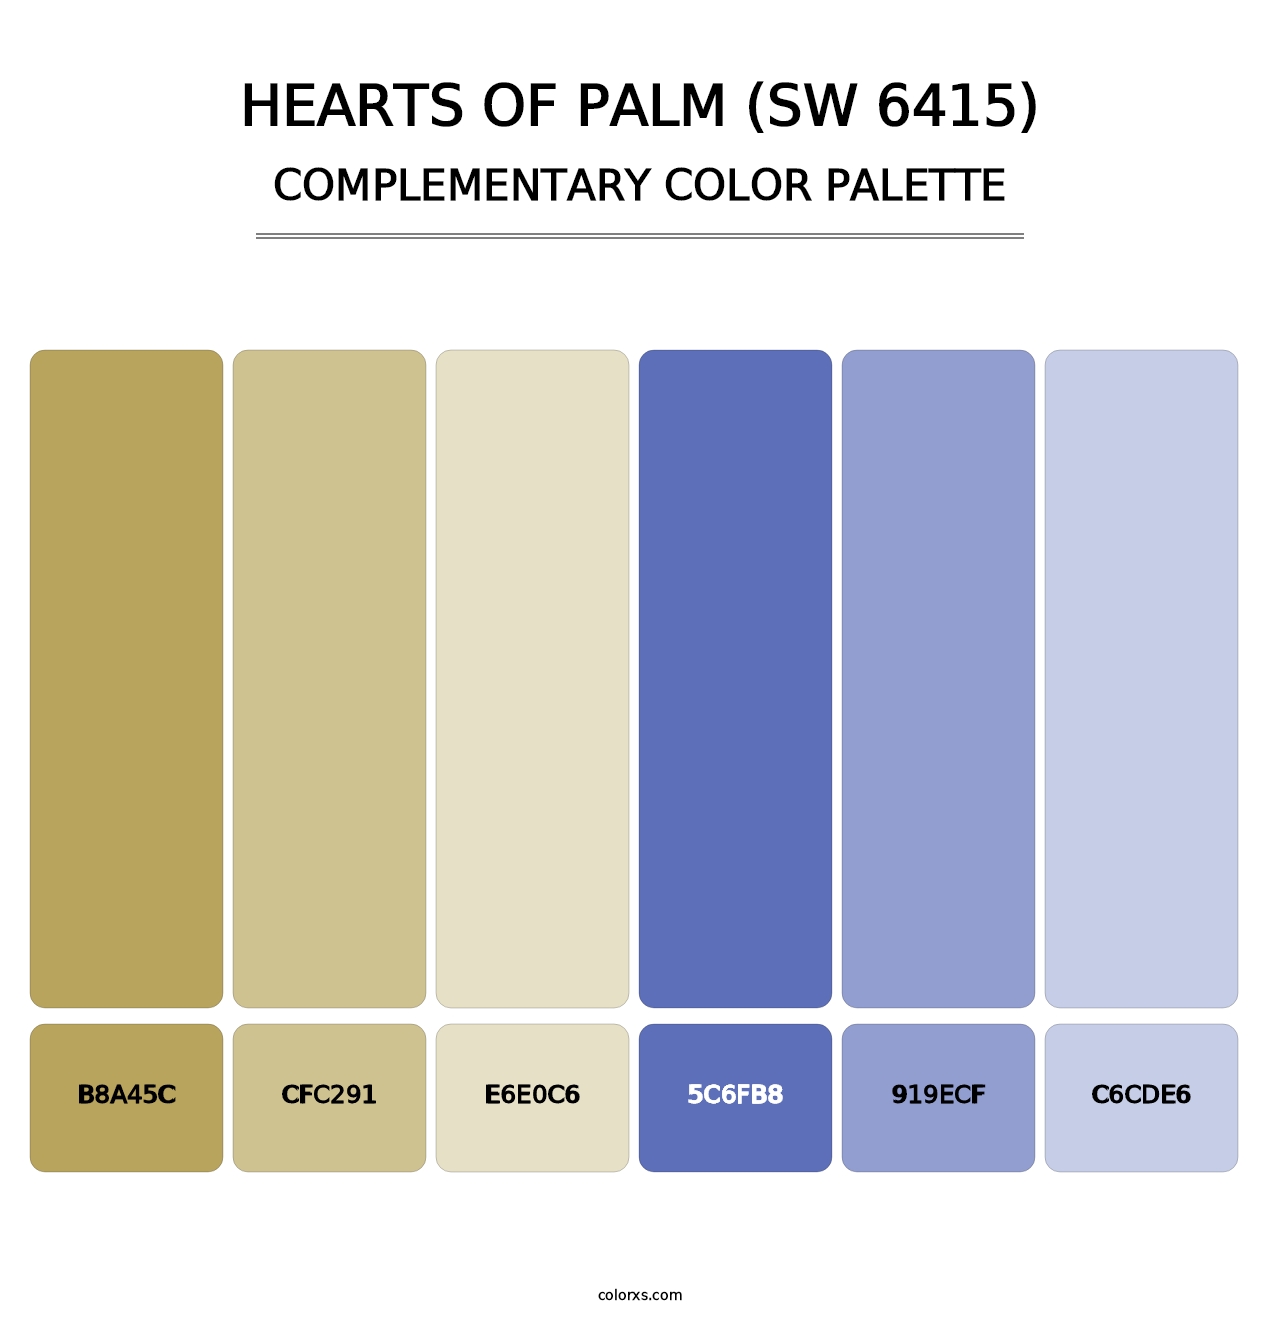 Hearts of Palm (SW 6415) - Complementary Color Palette